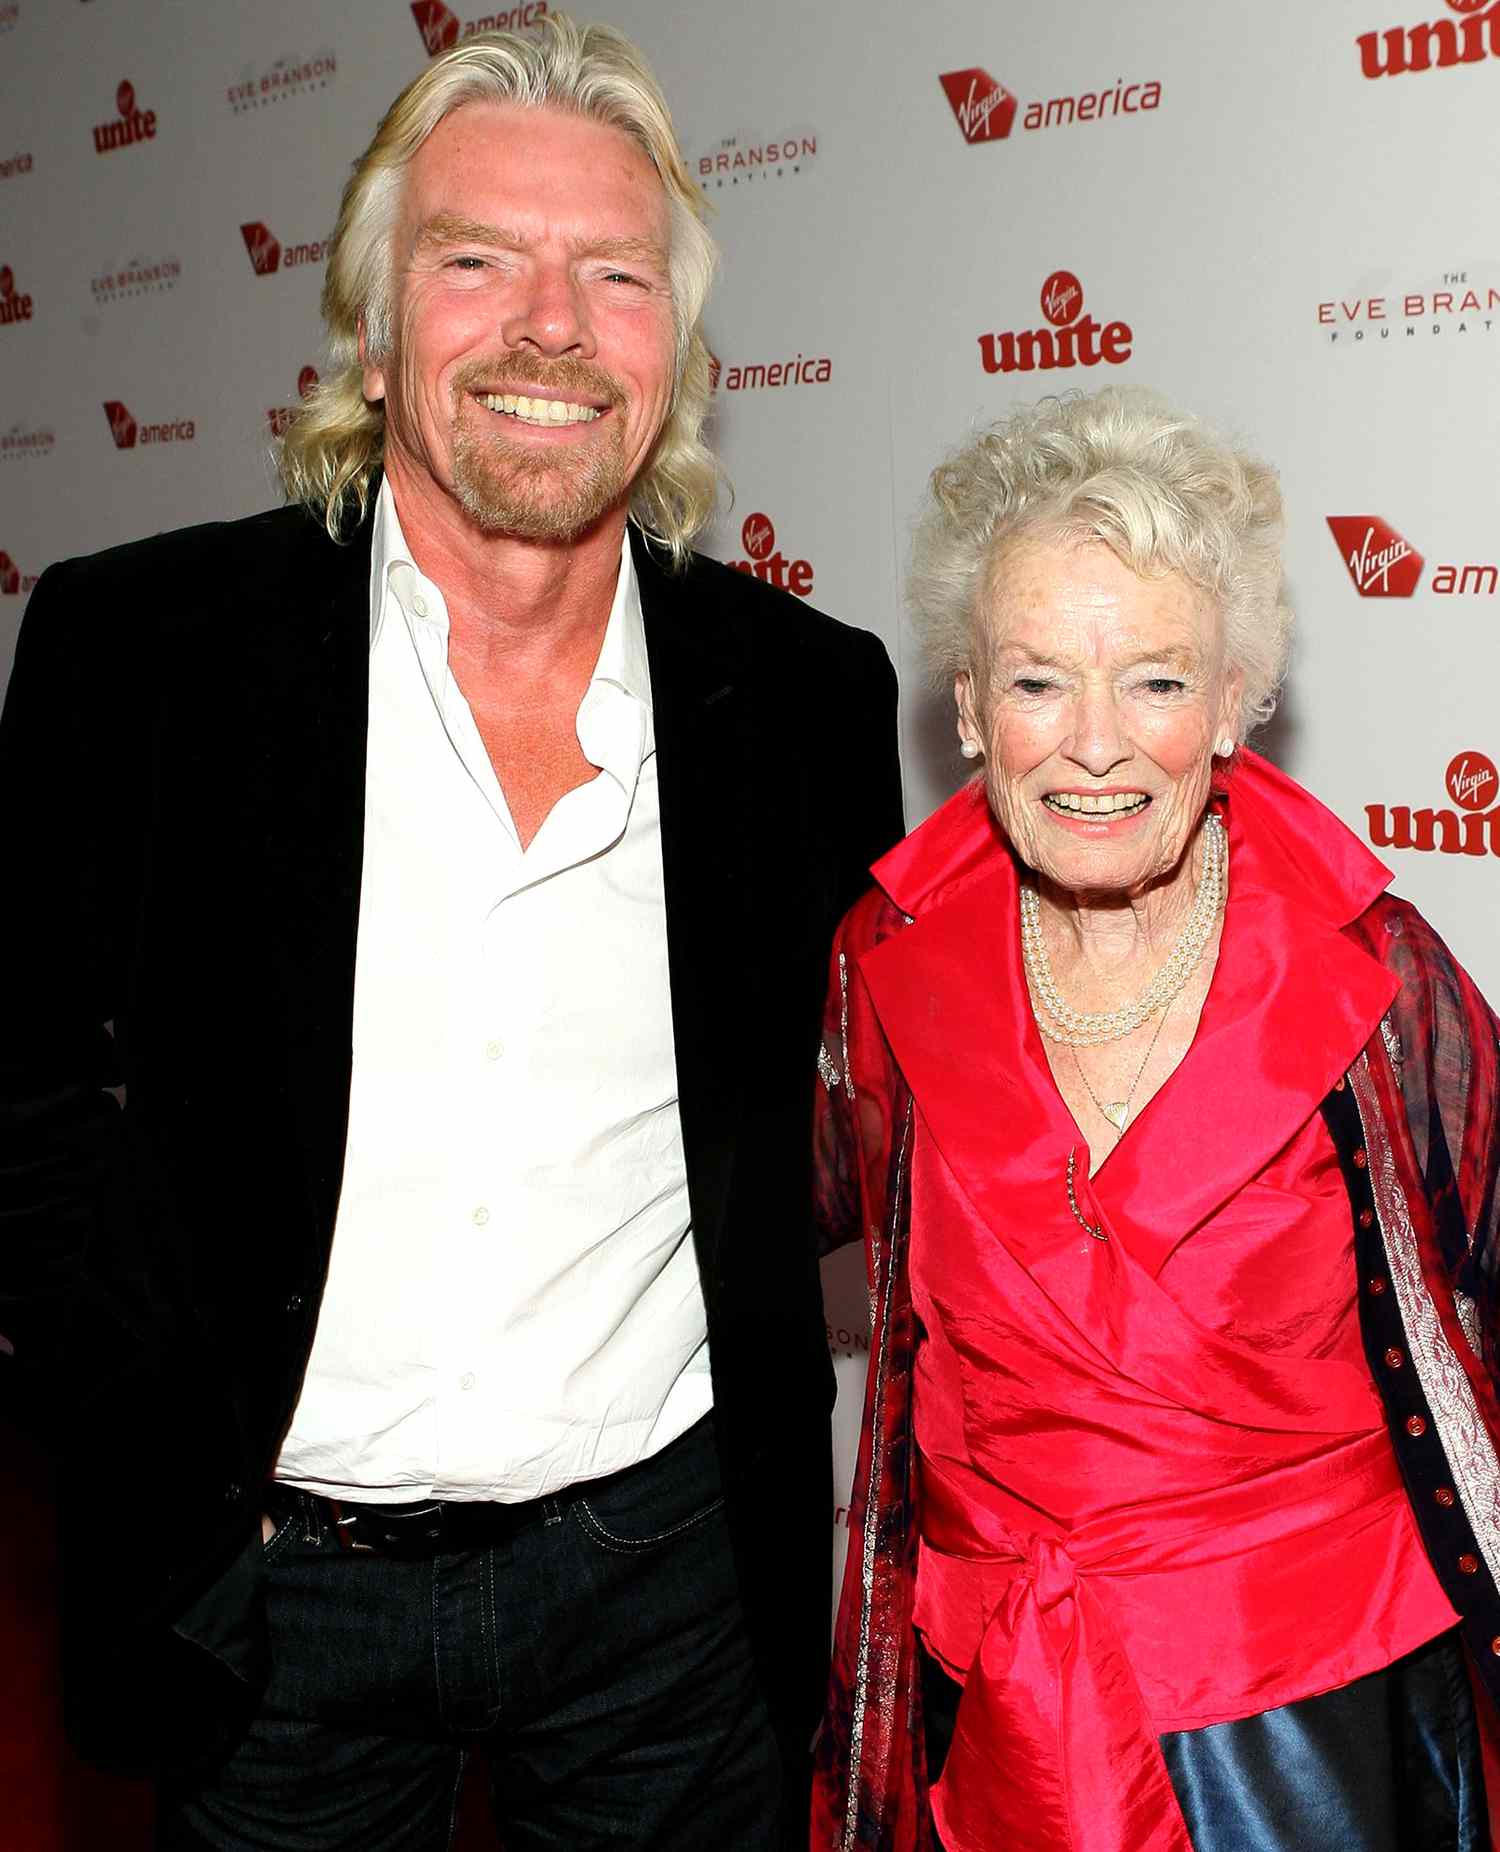 11+ Richard Branson Email Address Pictures